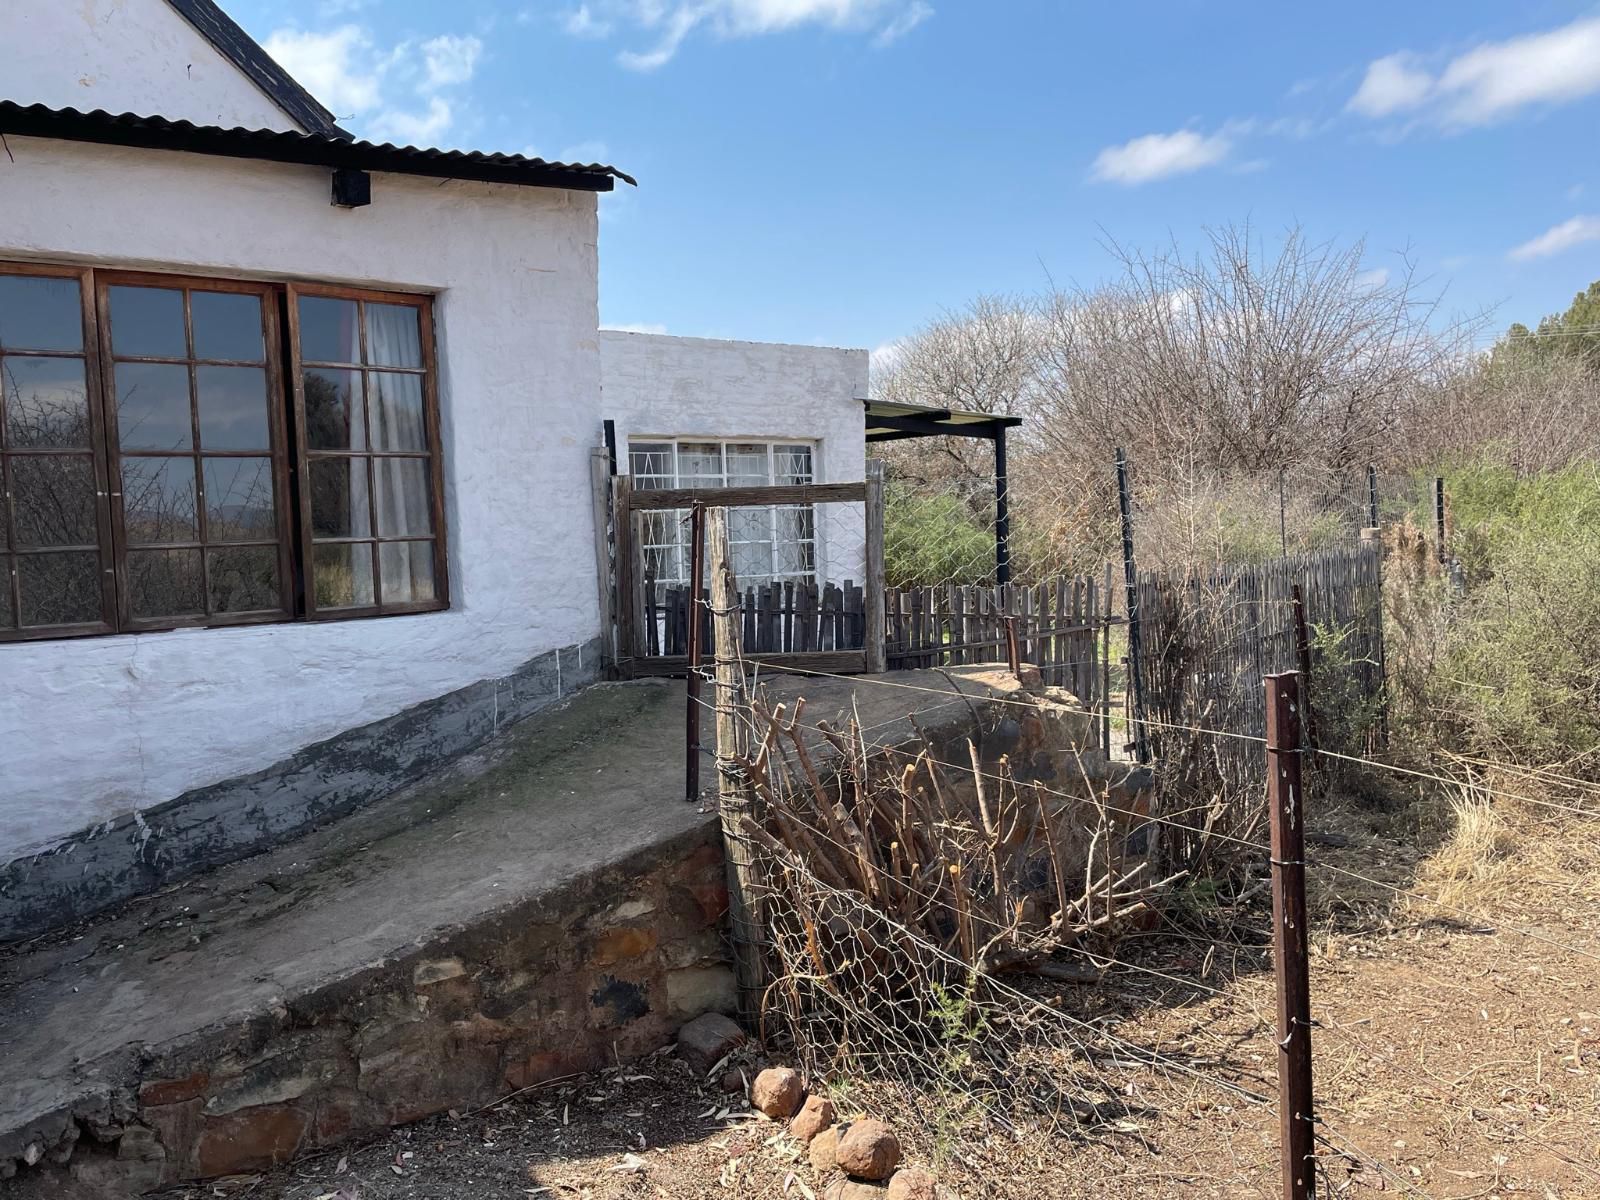 Erin Farmhouse And Cottages Middelburg Eastern Cape Eastern Cape South Africa House, Building, Architecture